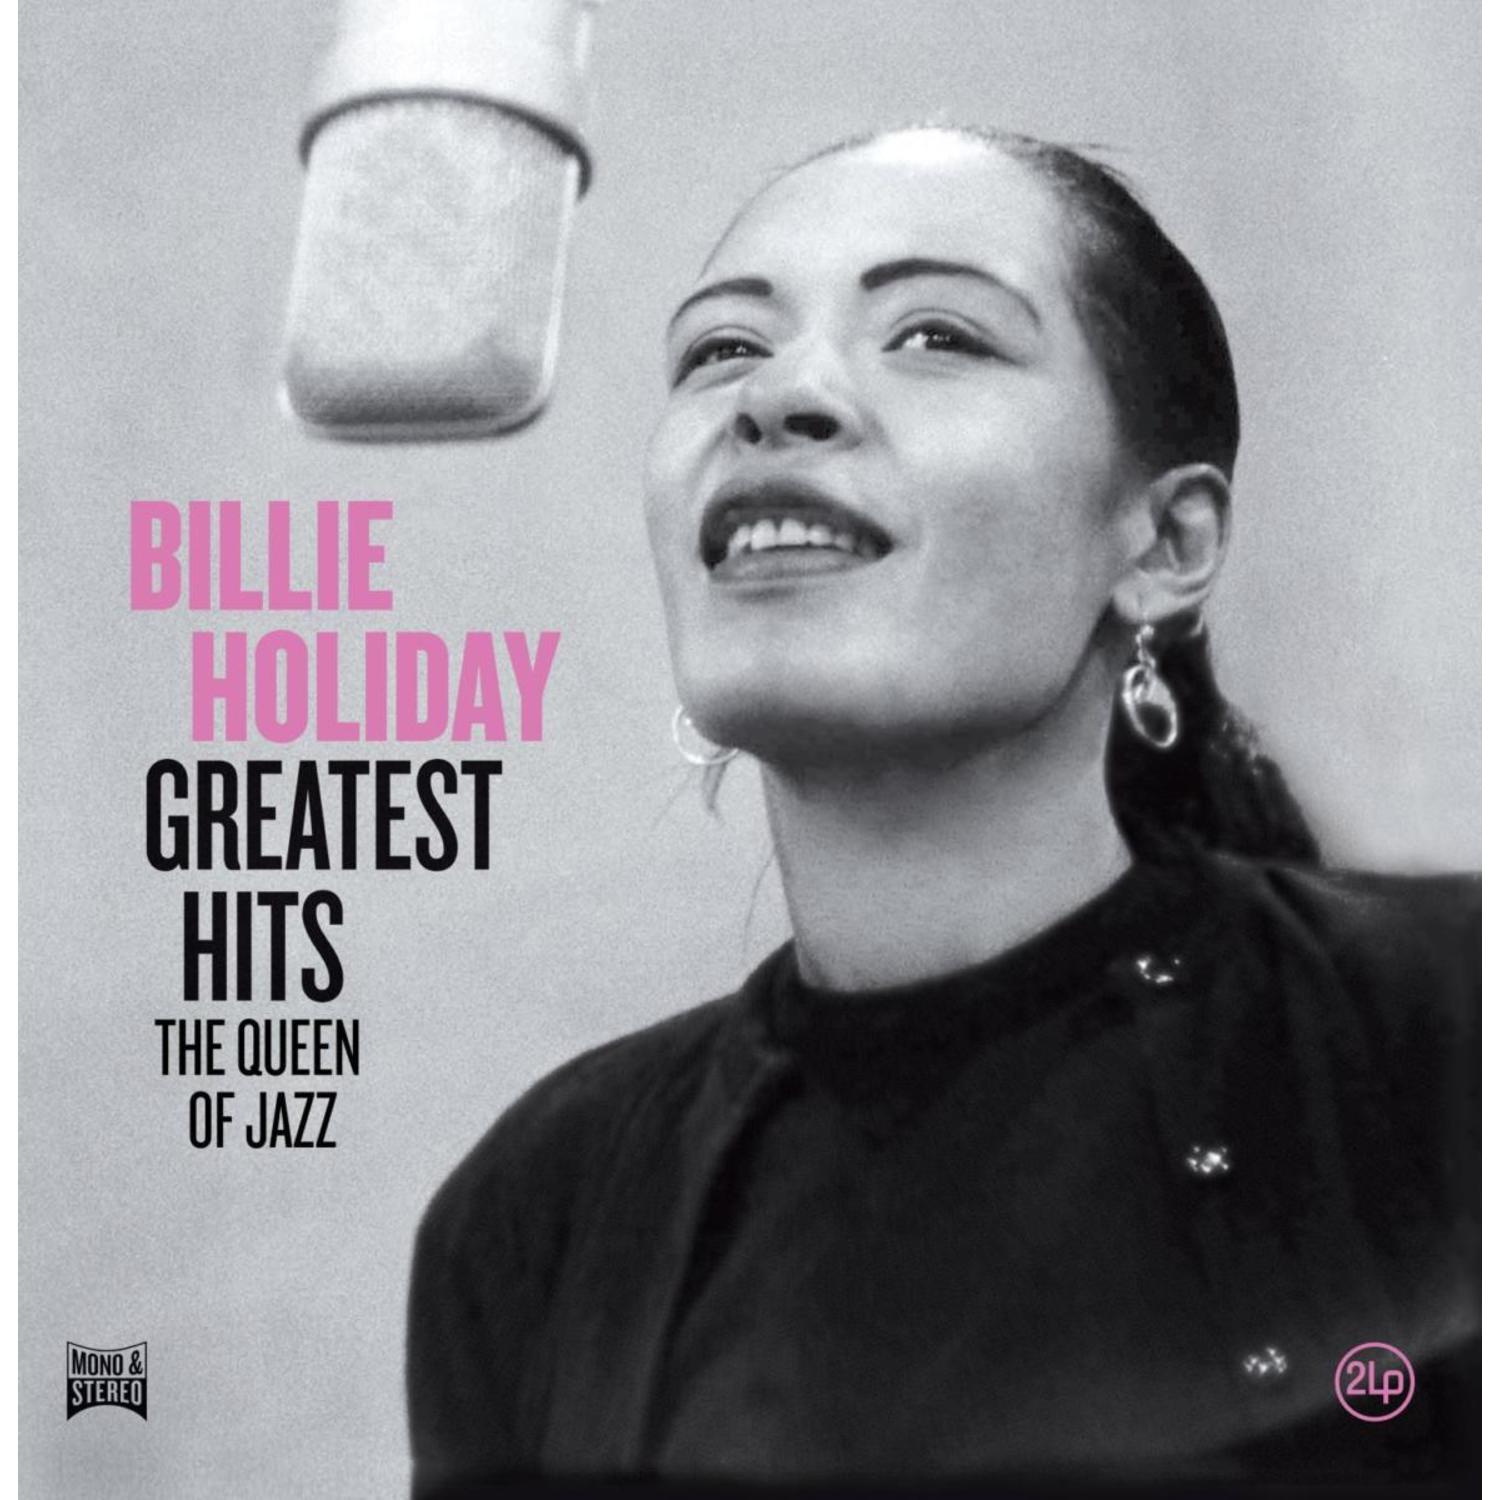 Billie Holiday - GREATEST HITS 